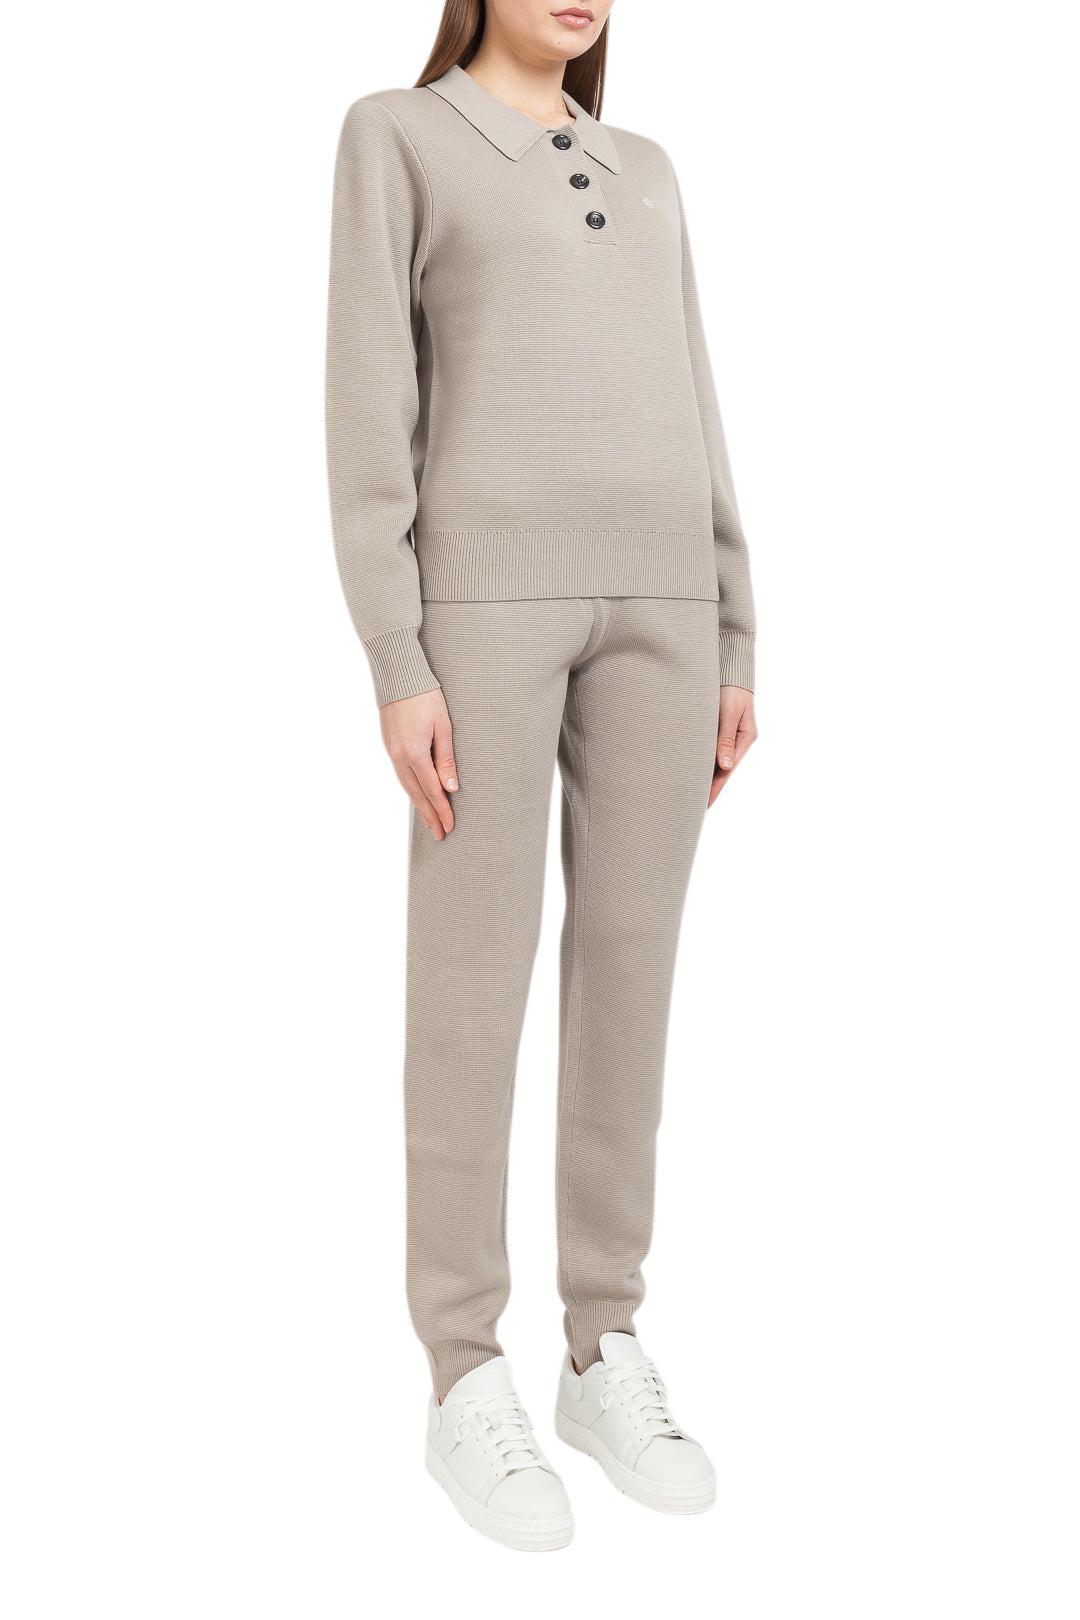 The Garment-Merino wool sweater with classic collar-dgallerystore